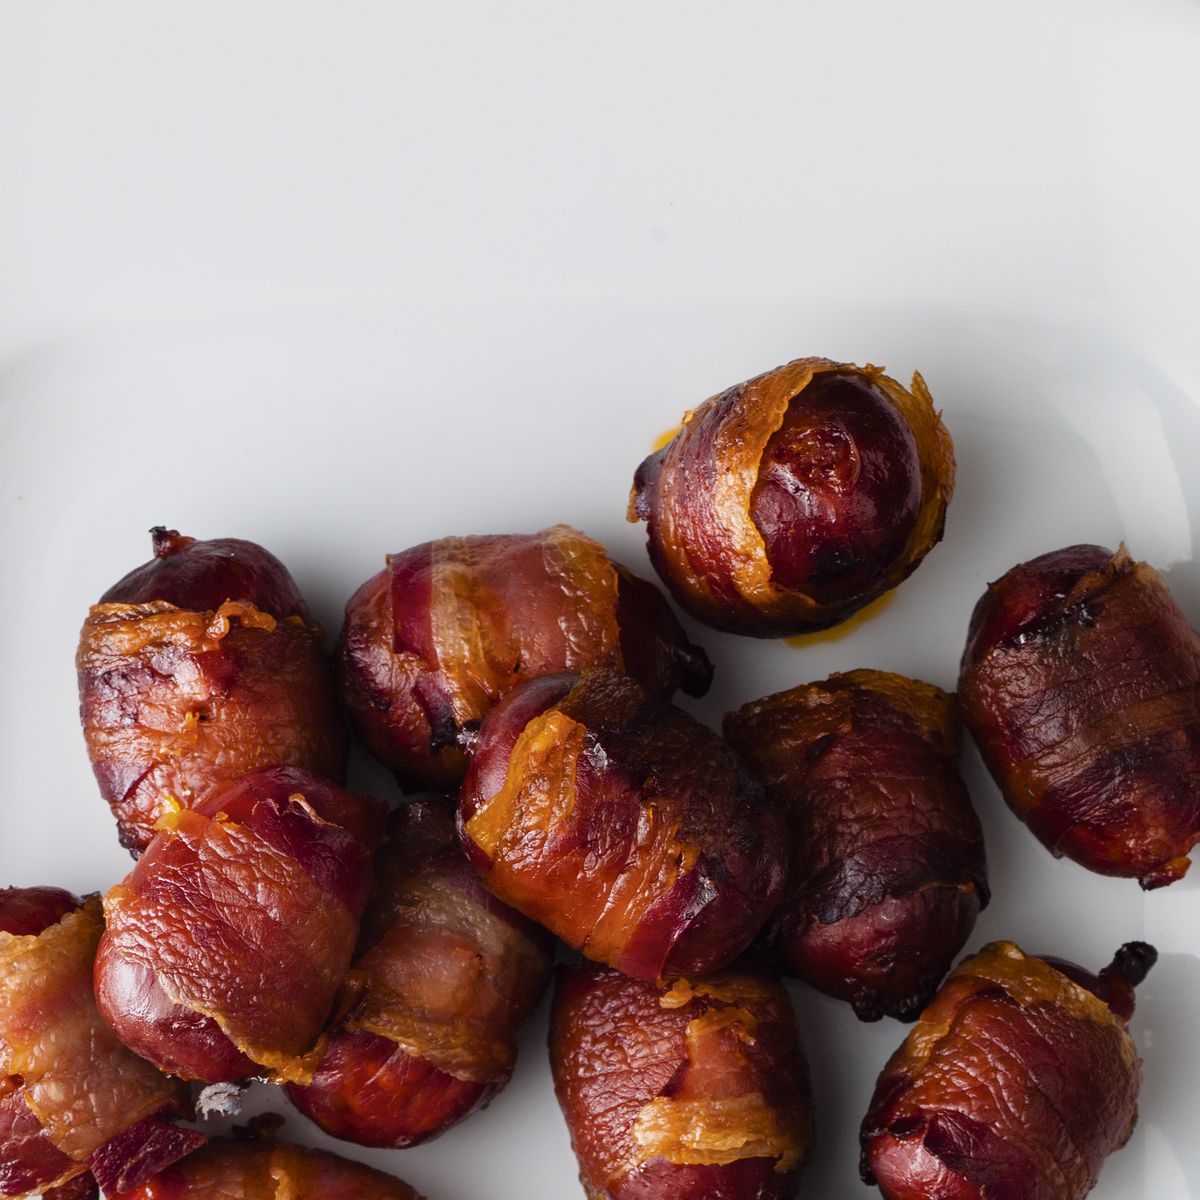 This alternative take on a classic 'pig in blanket' will leave you hungry for more